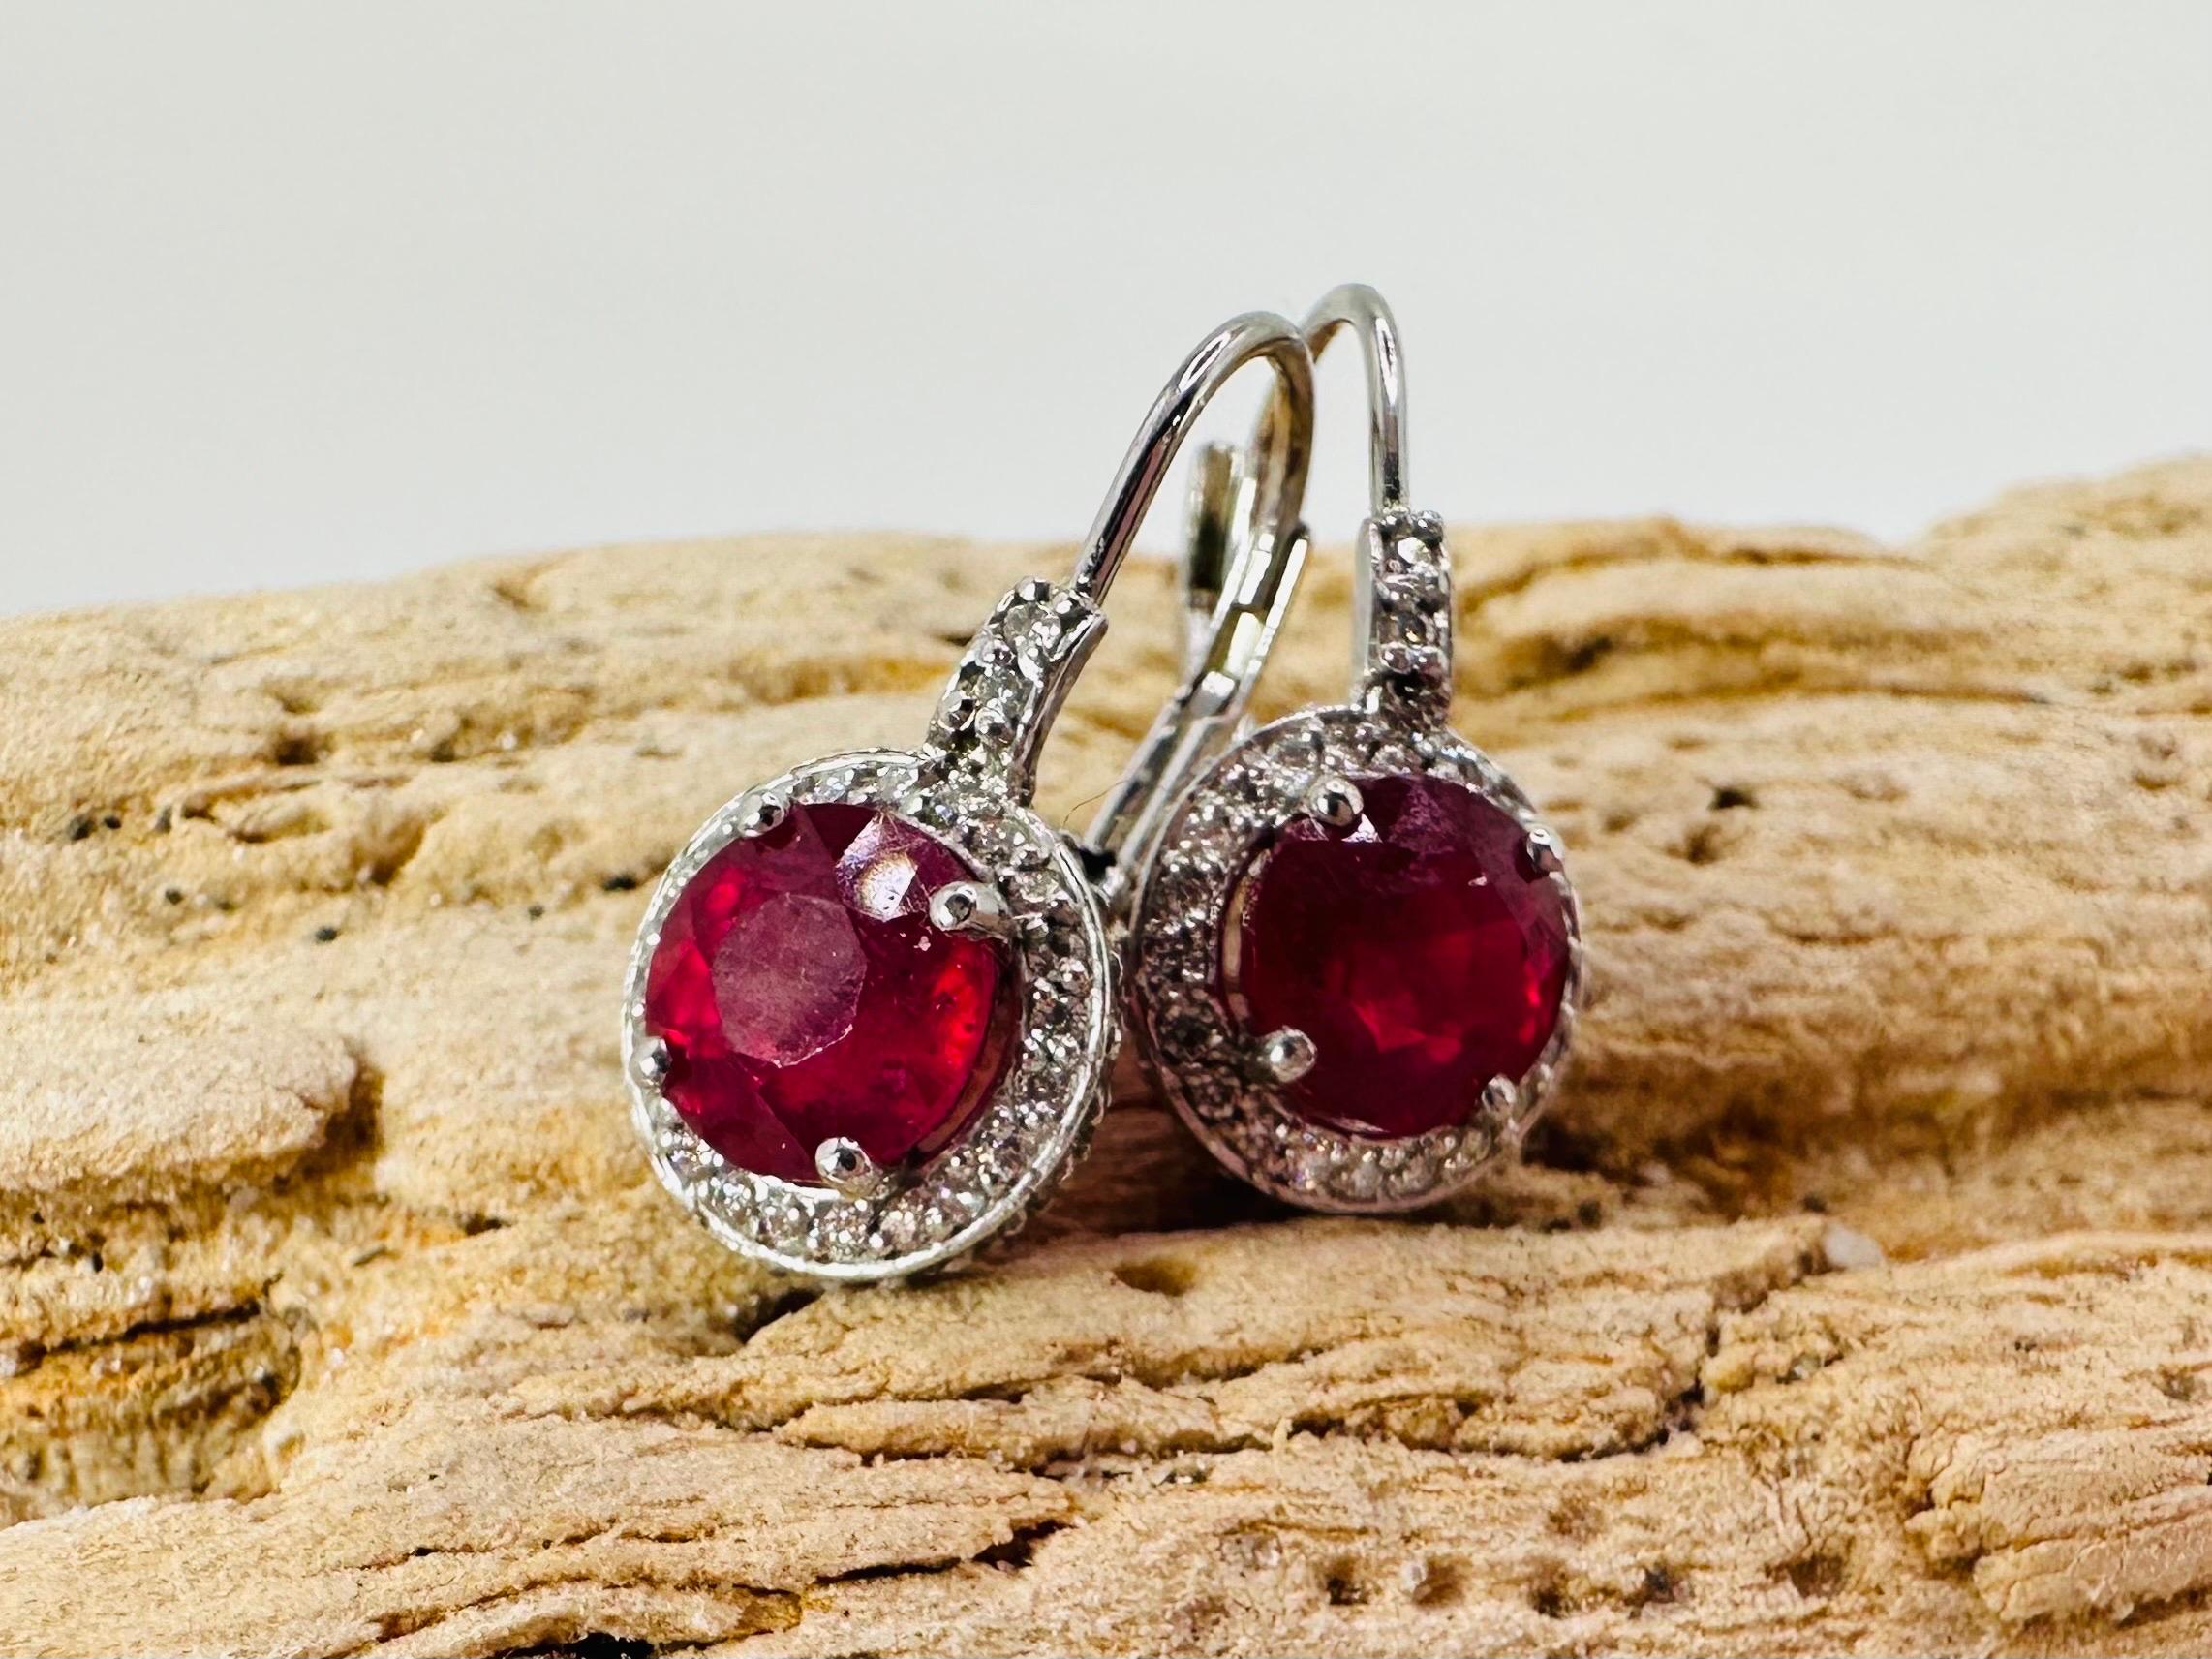 Stunning ruby and diamond earrings in 14KT white gold, the rubies sparkle with red wine color which is rare for this size. Rubies are treated with heat only.

GOLD: 14KT white gold
NATURAL DIAMOND(S)
Clarity/Color: VS-SI/F-G-H
Carat:1.04ct

NATURAL